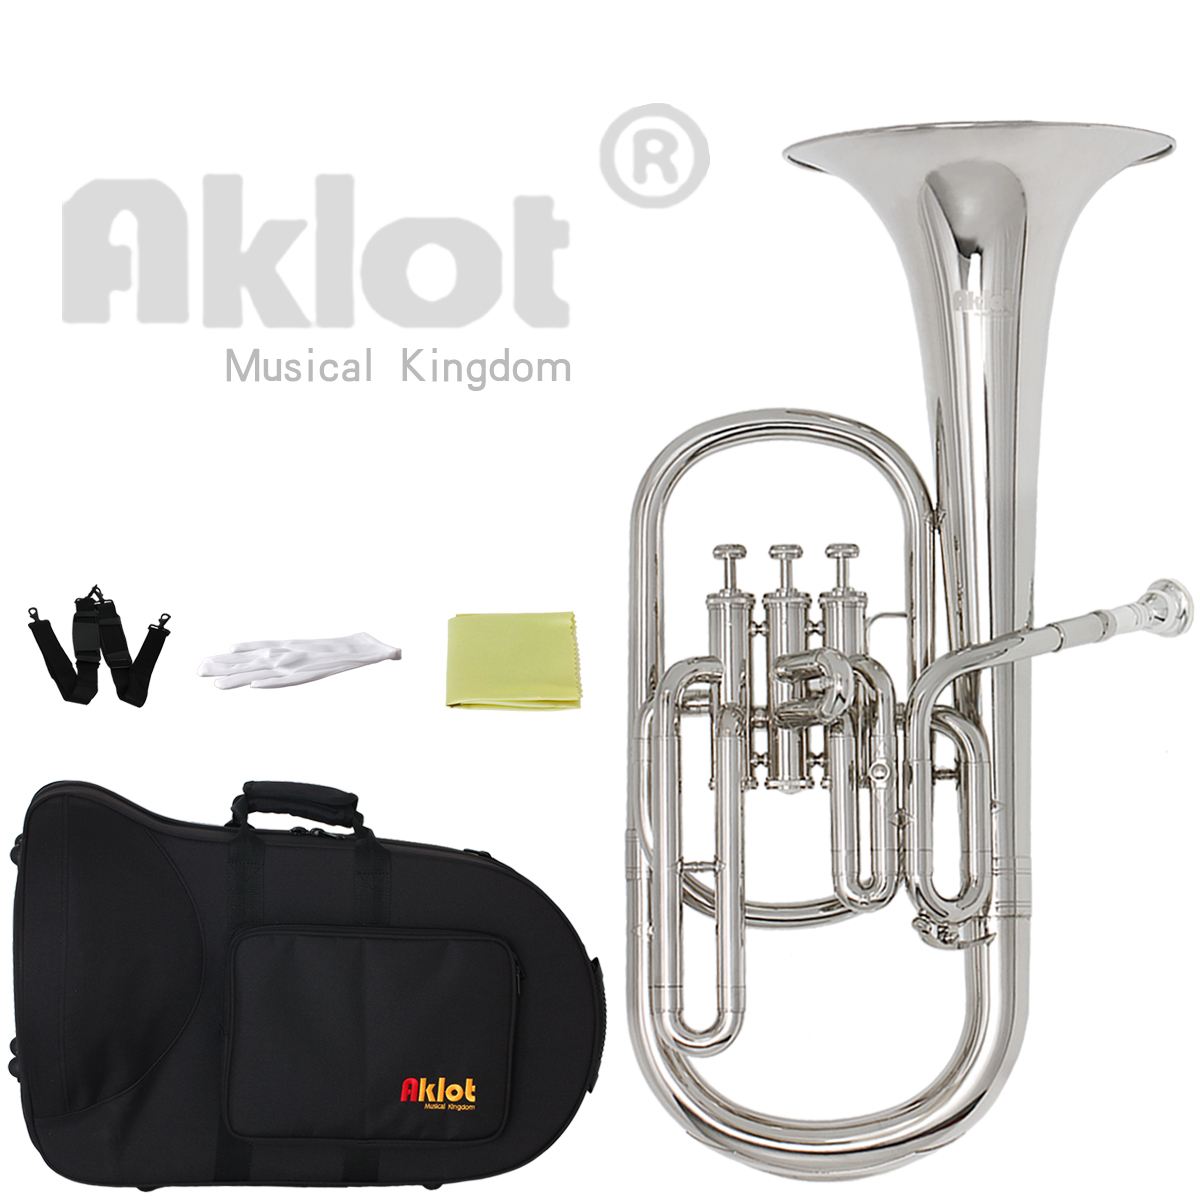 Aklot Intermediate Eb Nickel Alto Horn Silver Plated Mouthpiece Stainless Steel Piston with Case for Musical Education